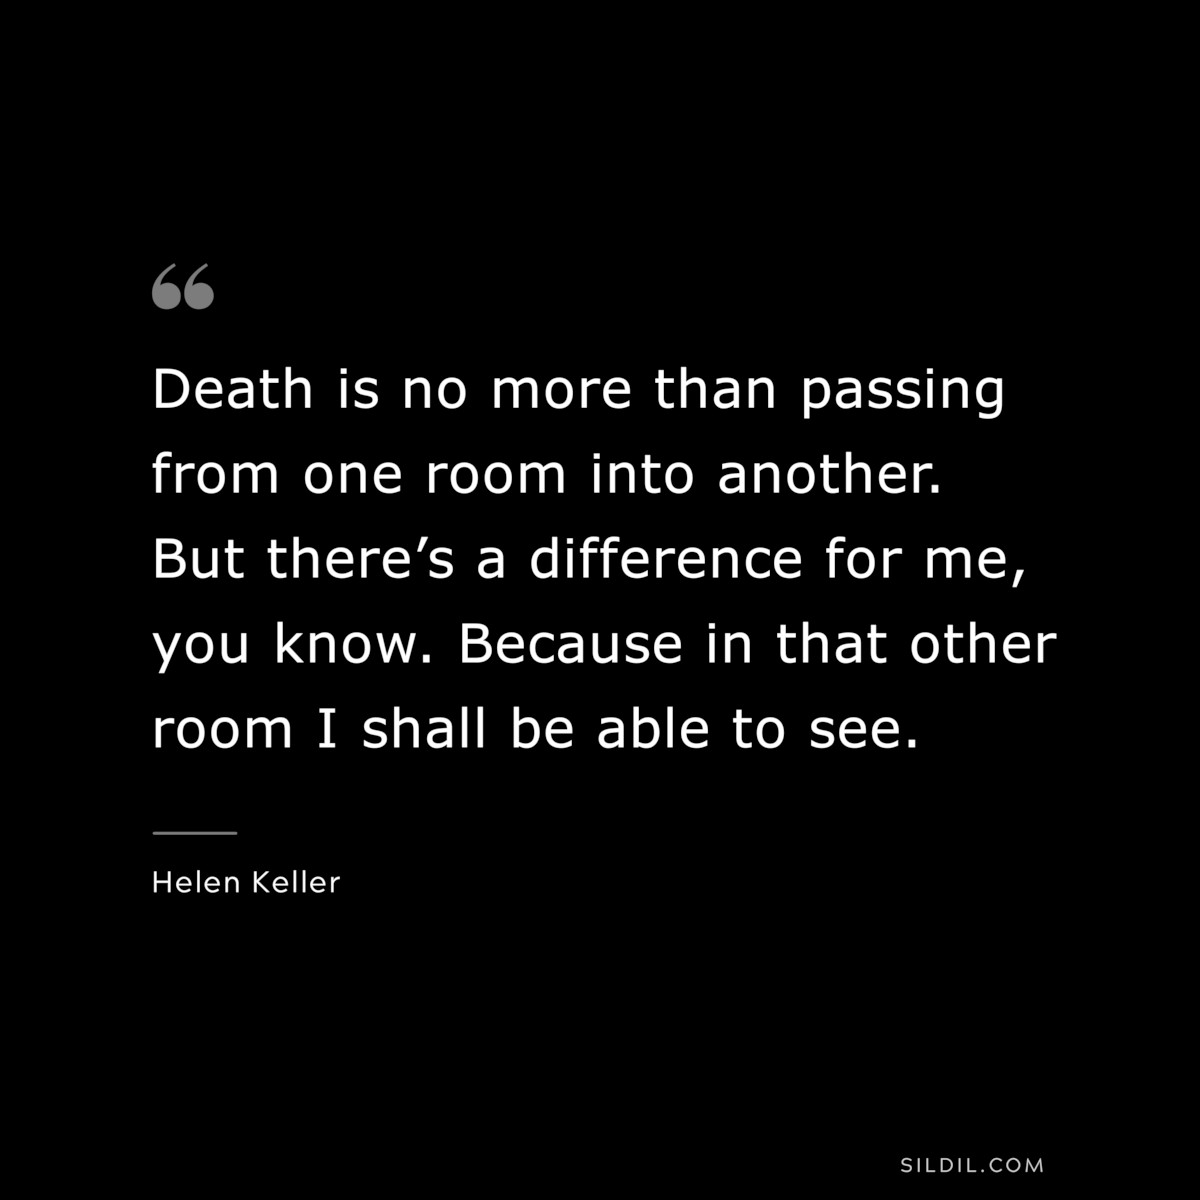 Death is no more than passing from one room into another. But there’s a difference for me, you know. Because in that other room I shall be able to see. ― Helen Keller